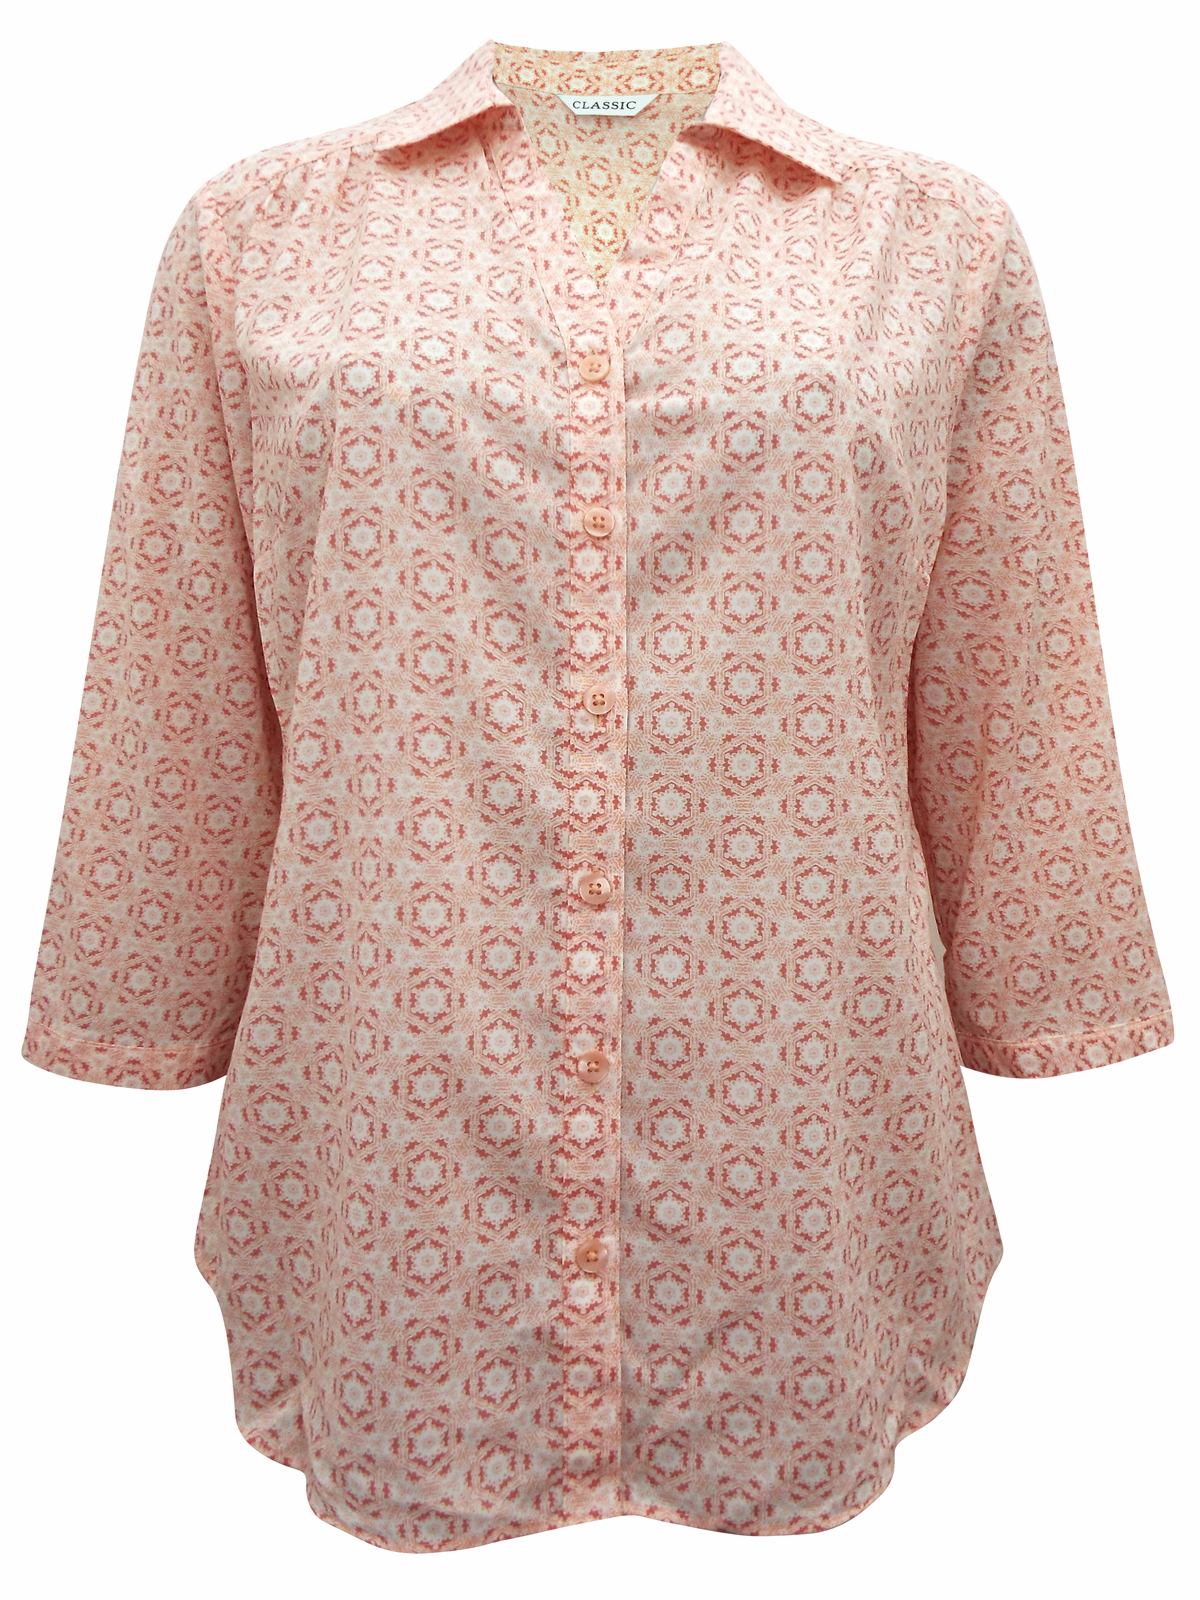 Marks and Spencer - - M&5 CORAL 3/4 Sleeve Tile Print Shirt - Size 10 to 24